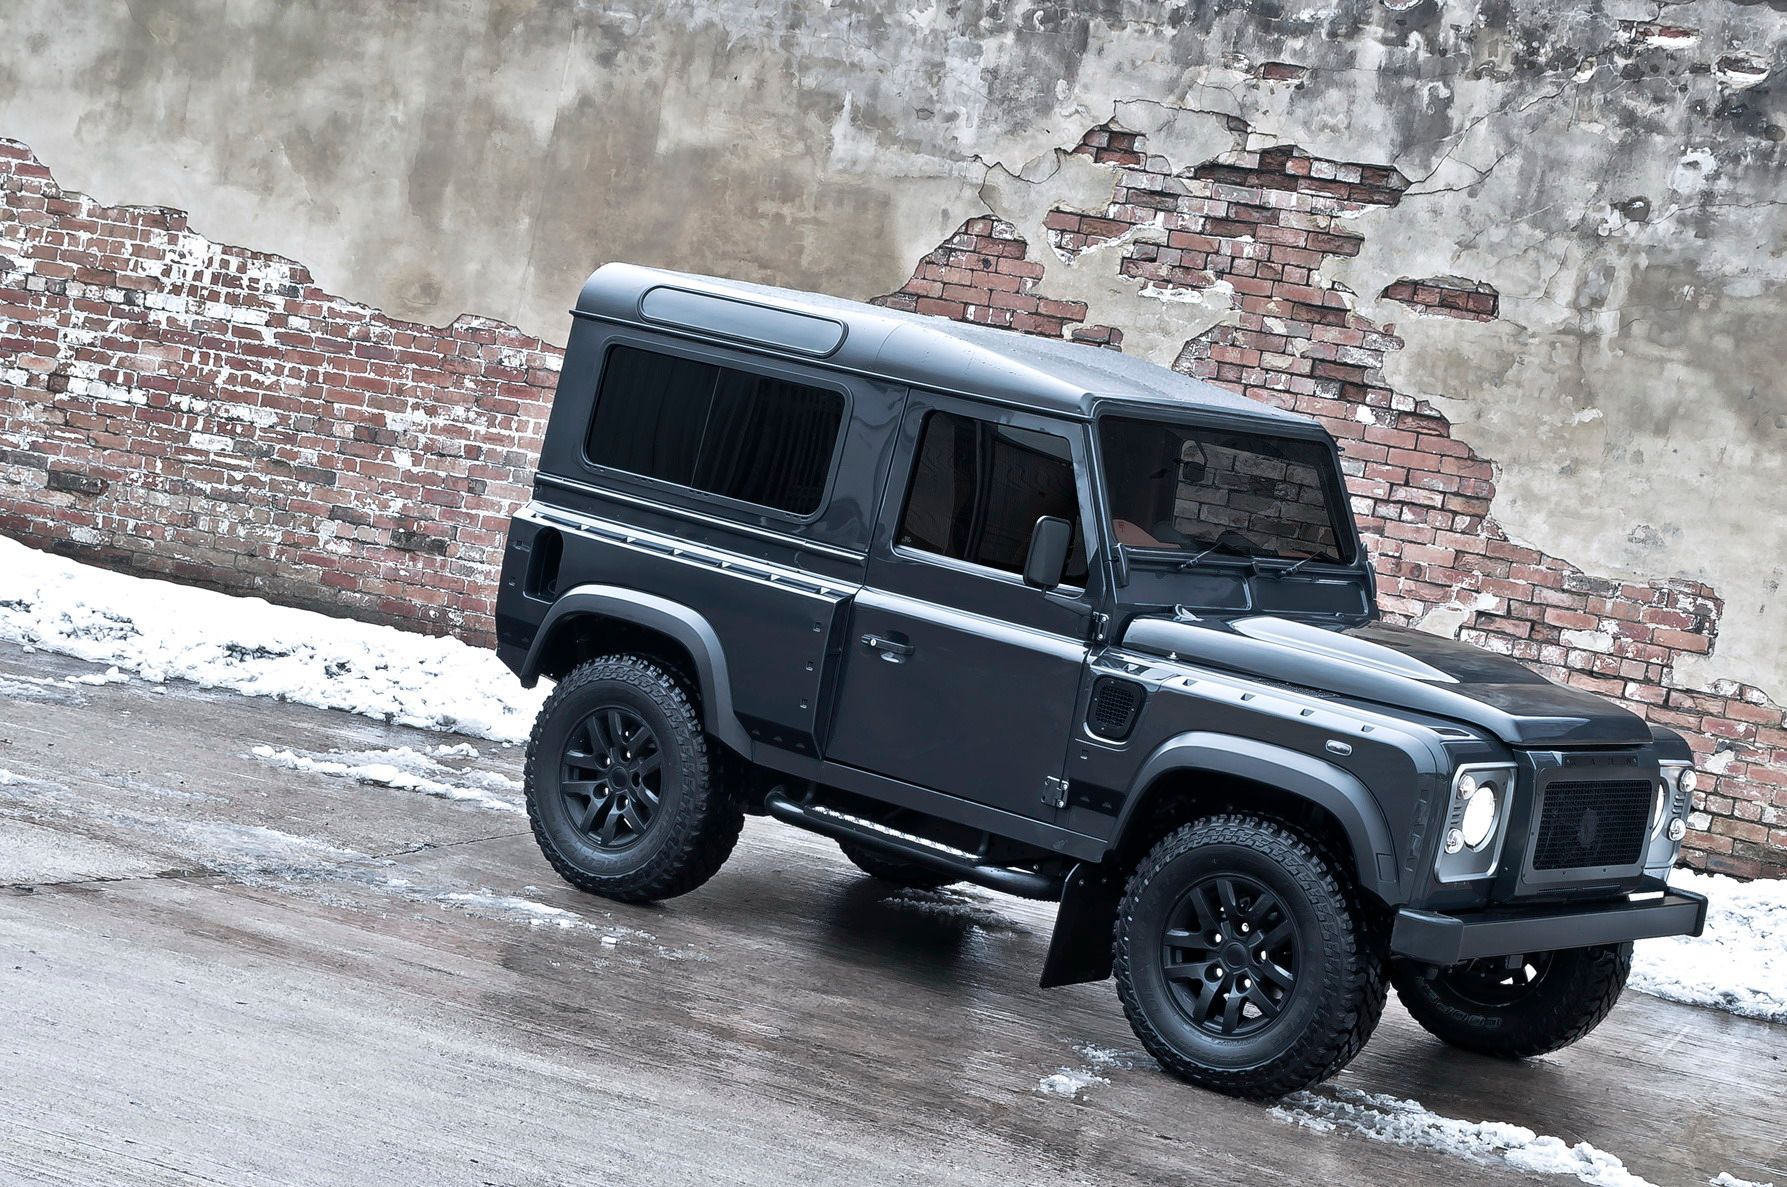 2013 Land Rover Defender Military Edition by Kahn Design